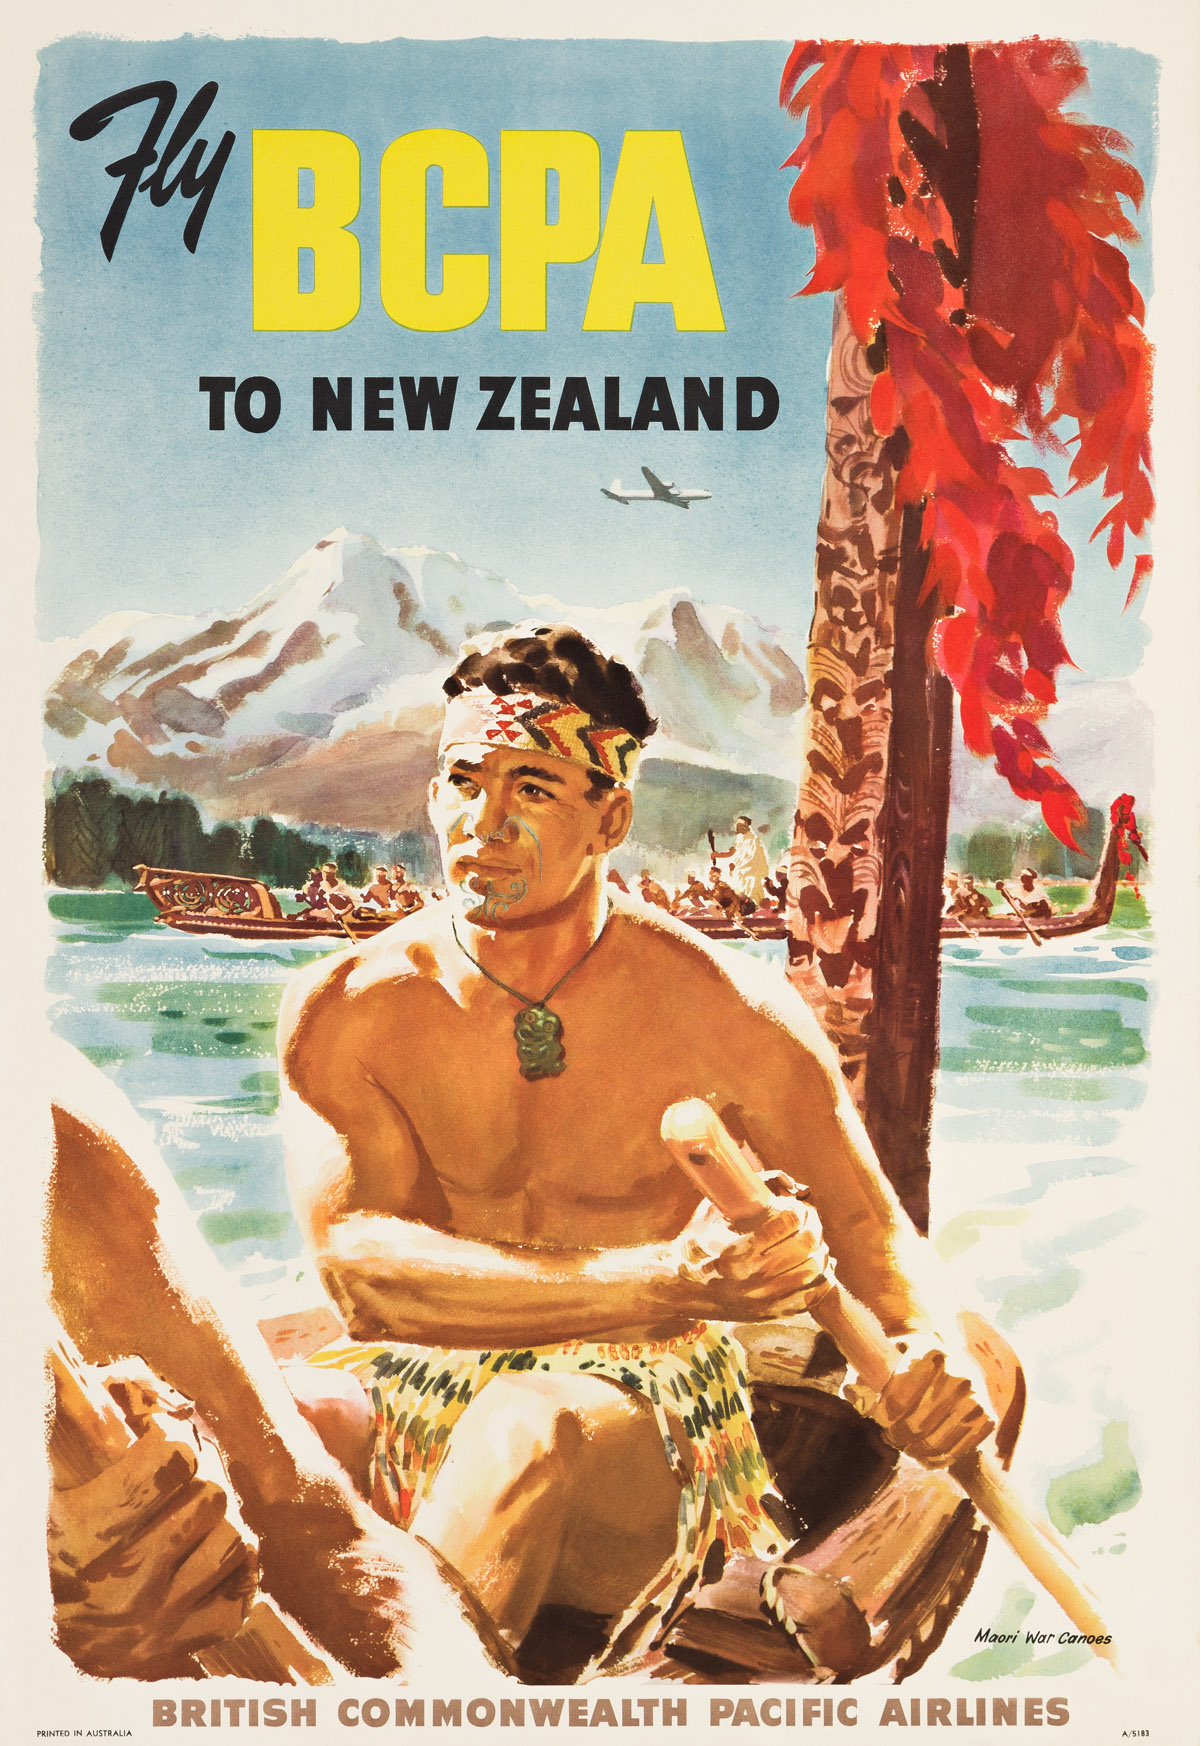 VARIOUS ARTISTS.  FLY BCPA TO NEW ZEALAND. Two posters. Circa 1950. Each approximately 29½x20 inches, 75x50¼ cm.